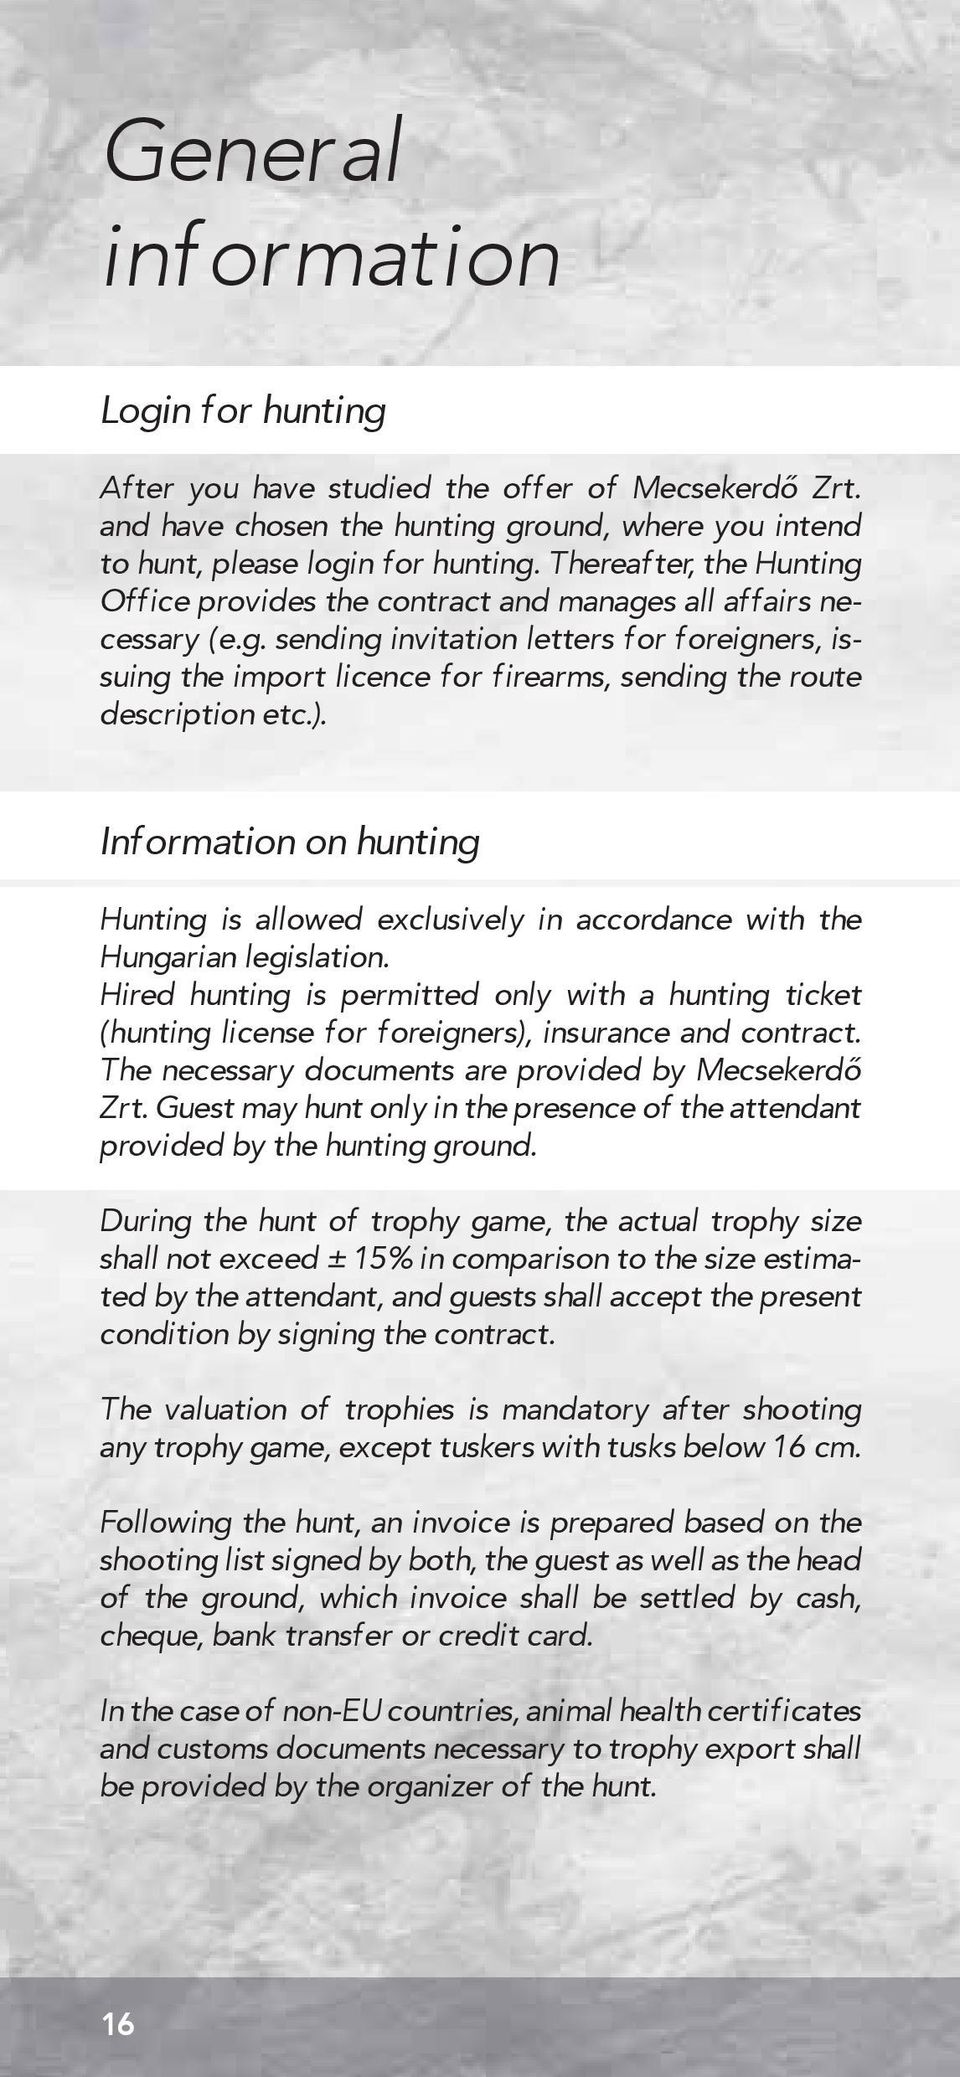 ). Information on hunting Hunting is allowed exclusively in accordance with the Hungarian legislation.